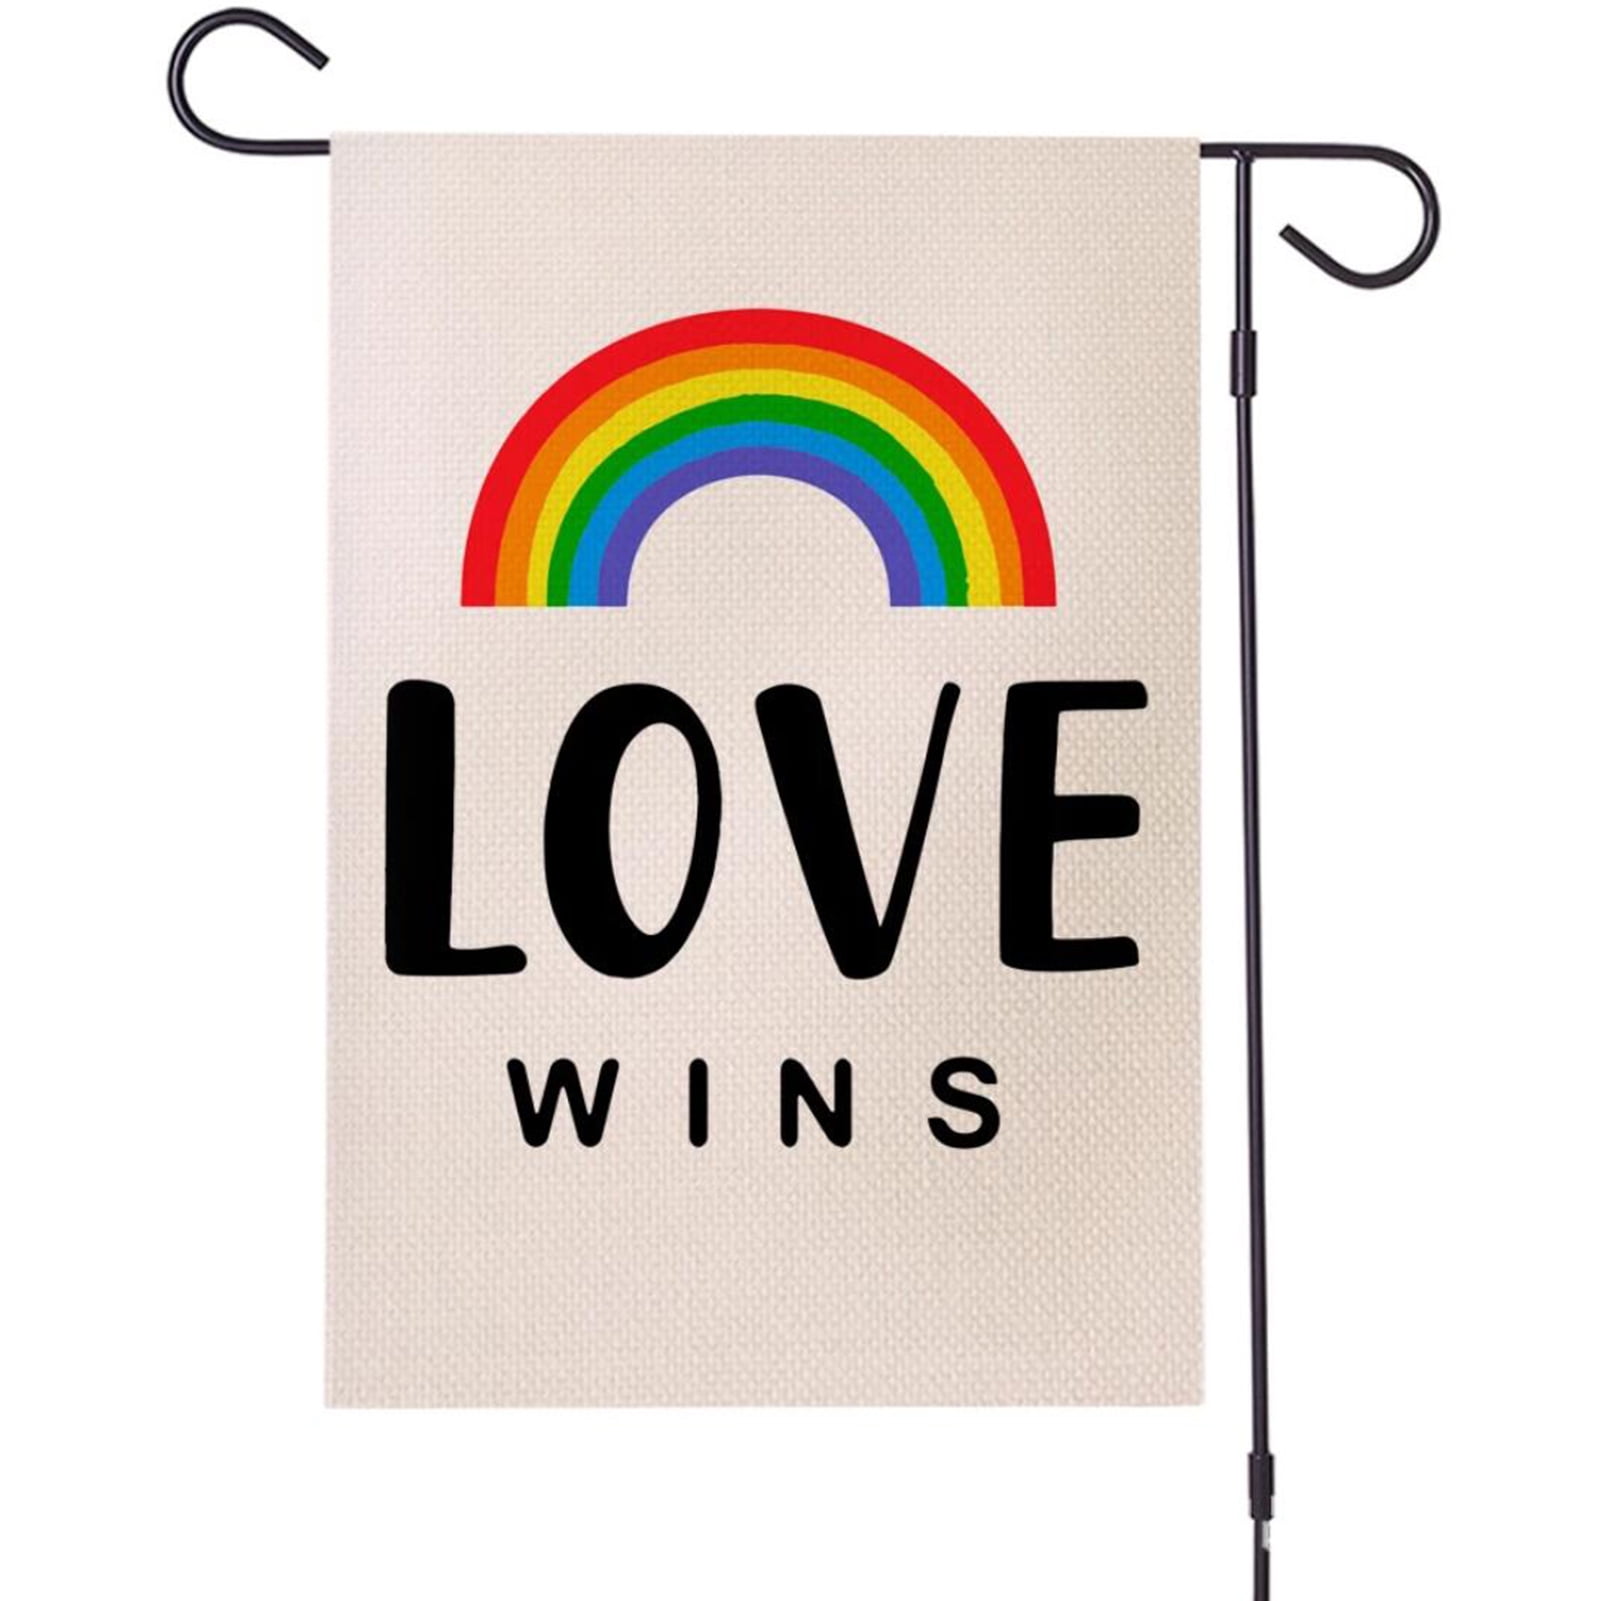 Imshie Rainbow Garden Flag Vertical Double Sided Pride Gay Pride Lesbian Lgbt Pansexual Flag